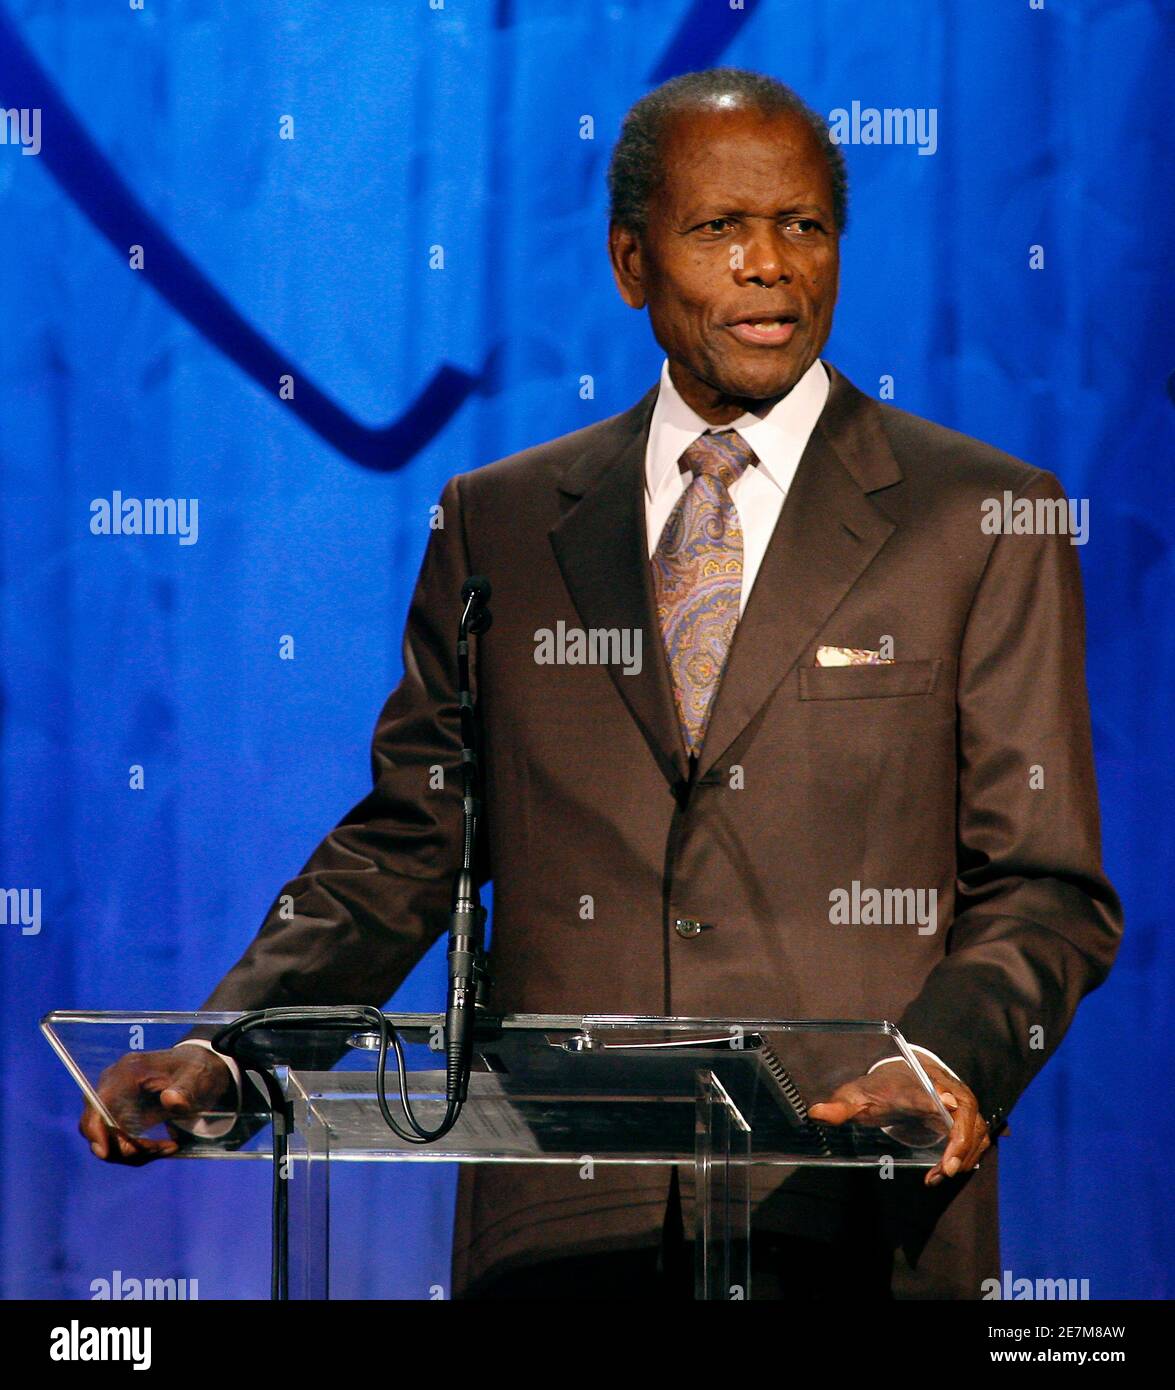 Actor Sidney Poitier speaks during a tribute honoring Motown founder Berry Gordy at the Cedars-Sinai Medical Center Heart Foundation in Beverly Hills June 7, 2008. REUTERS/Gus Ruelas (UNITED STATES) Stock Photo